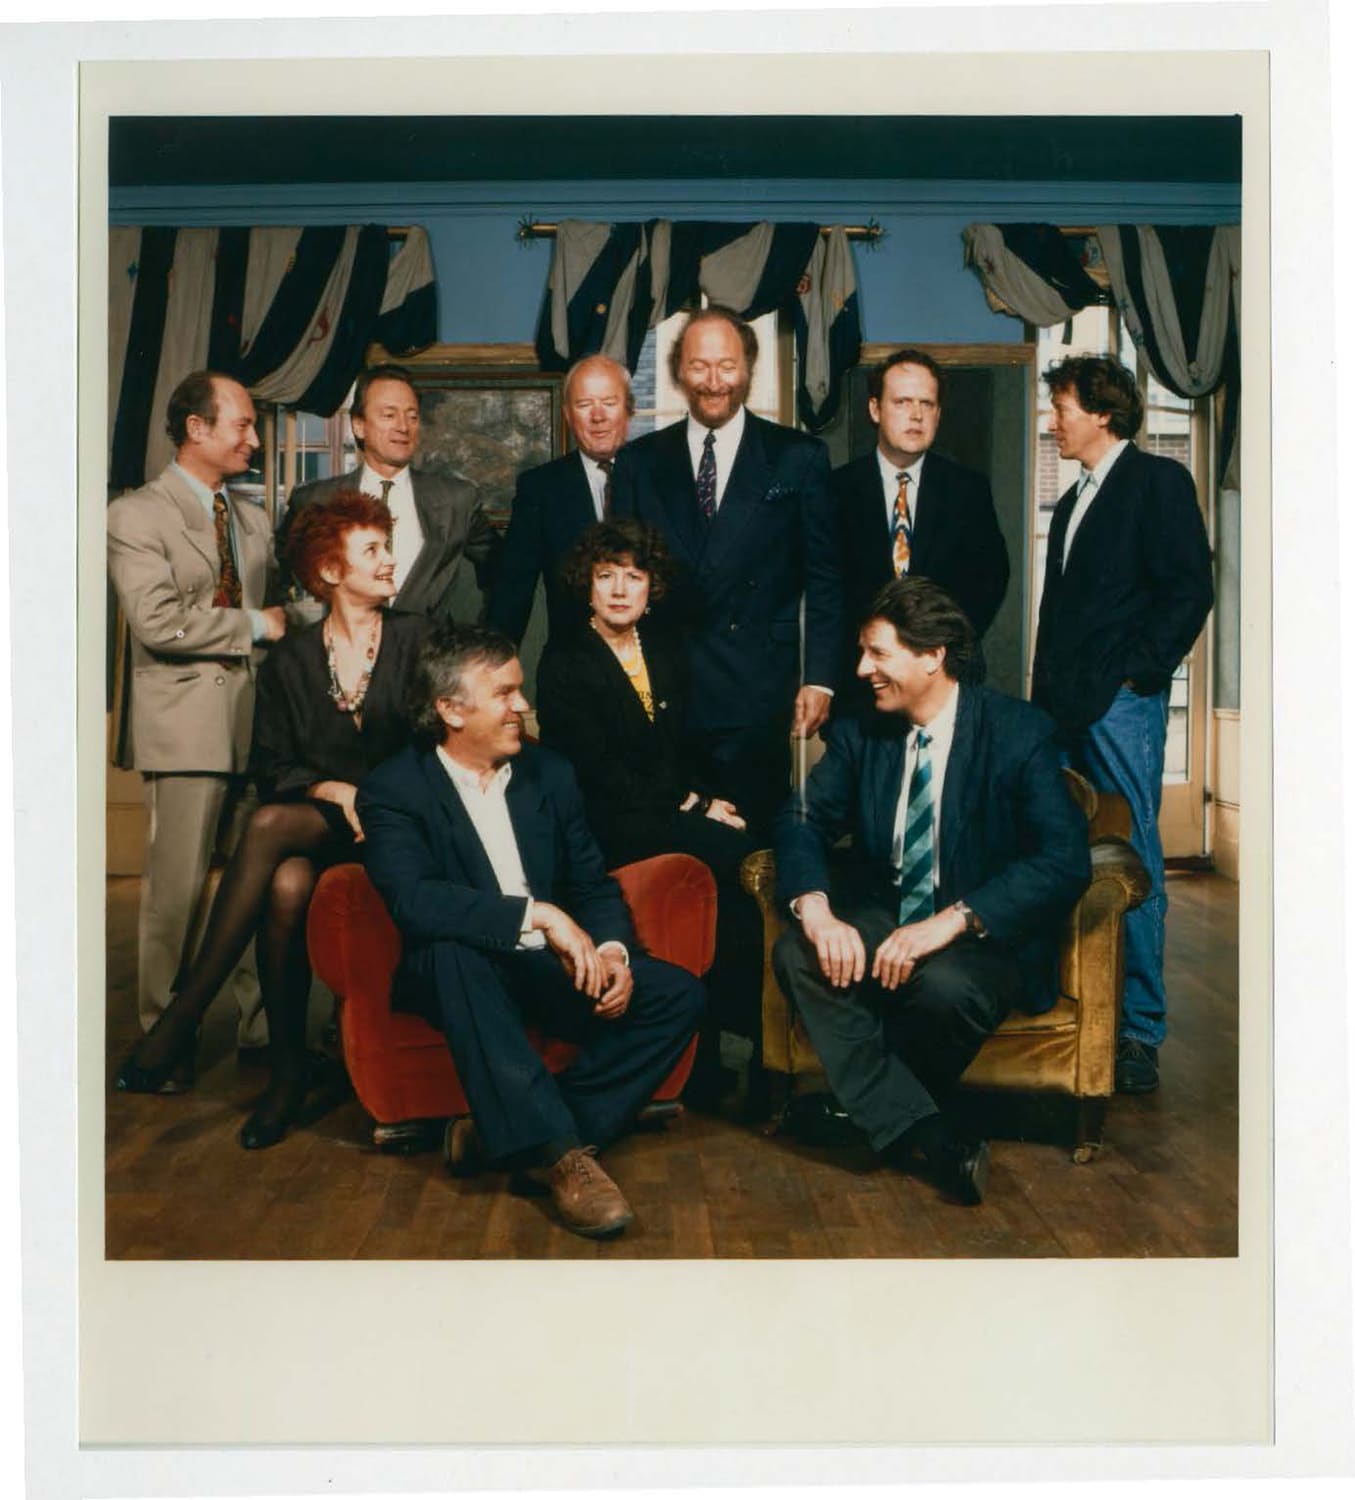 The Groucho Club Founding Committee. Standing: Louis Baum, John Armit, Michael Sissons, Ed Victor, Liam Carson, Tchaik Chassay. Seated: Liz Calder, Matthew Evans, Carmen Callil, and Tony Mackintosh. Photo by Terry O'Neill. Courtesy of The Groucho Club.